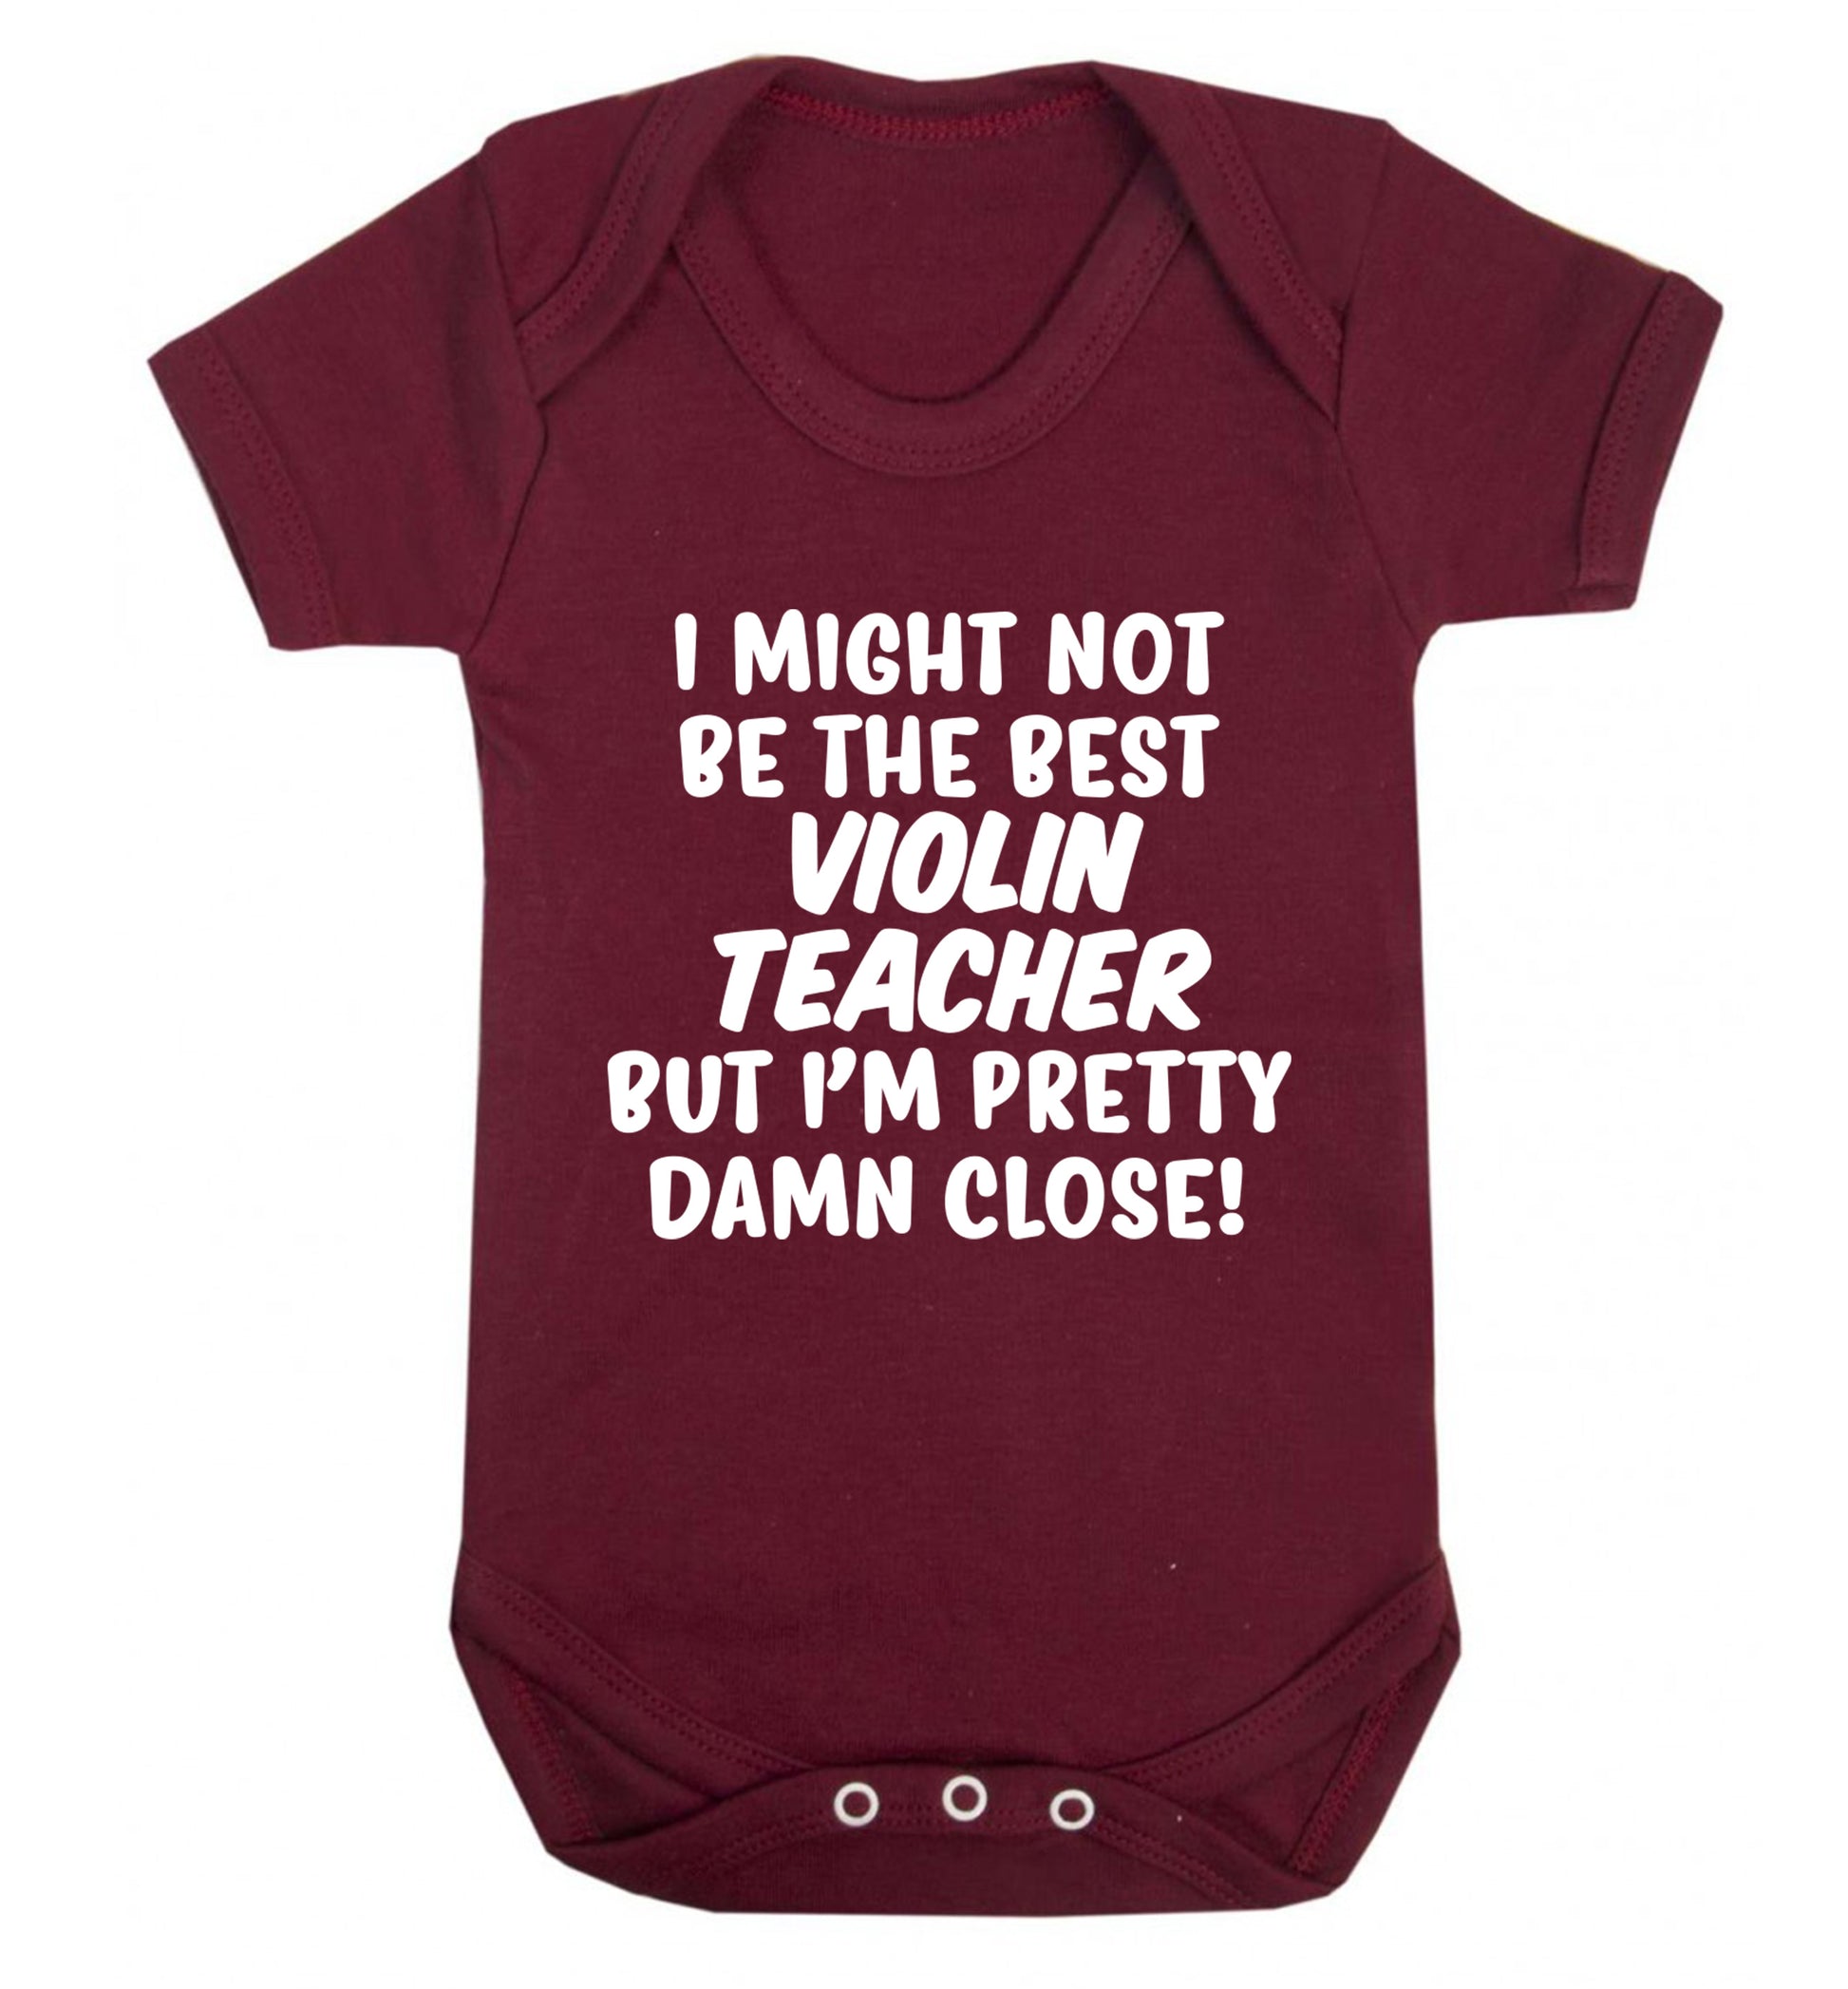 I might not be the best violin teacher but I'm pretty close Baby Vest maroon 18-24 months